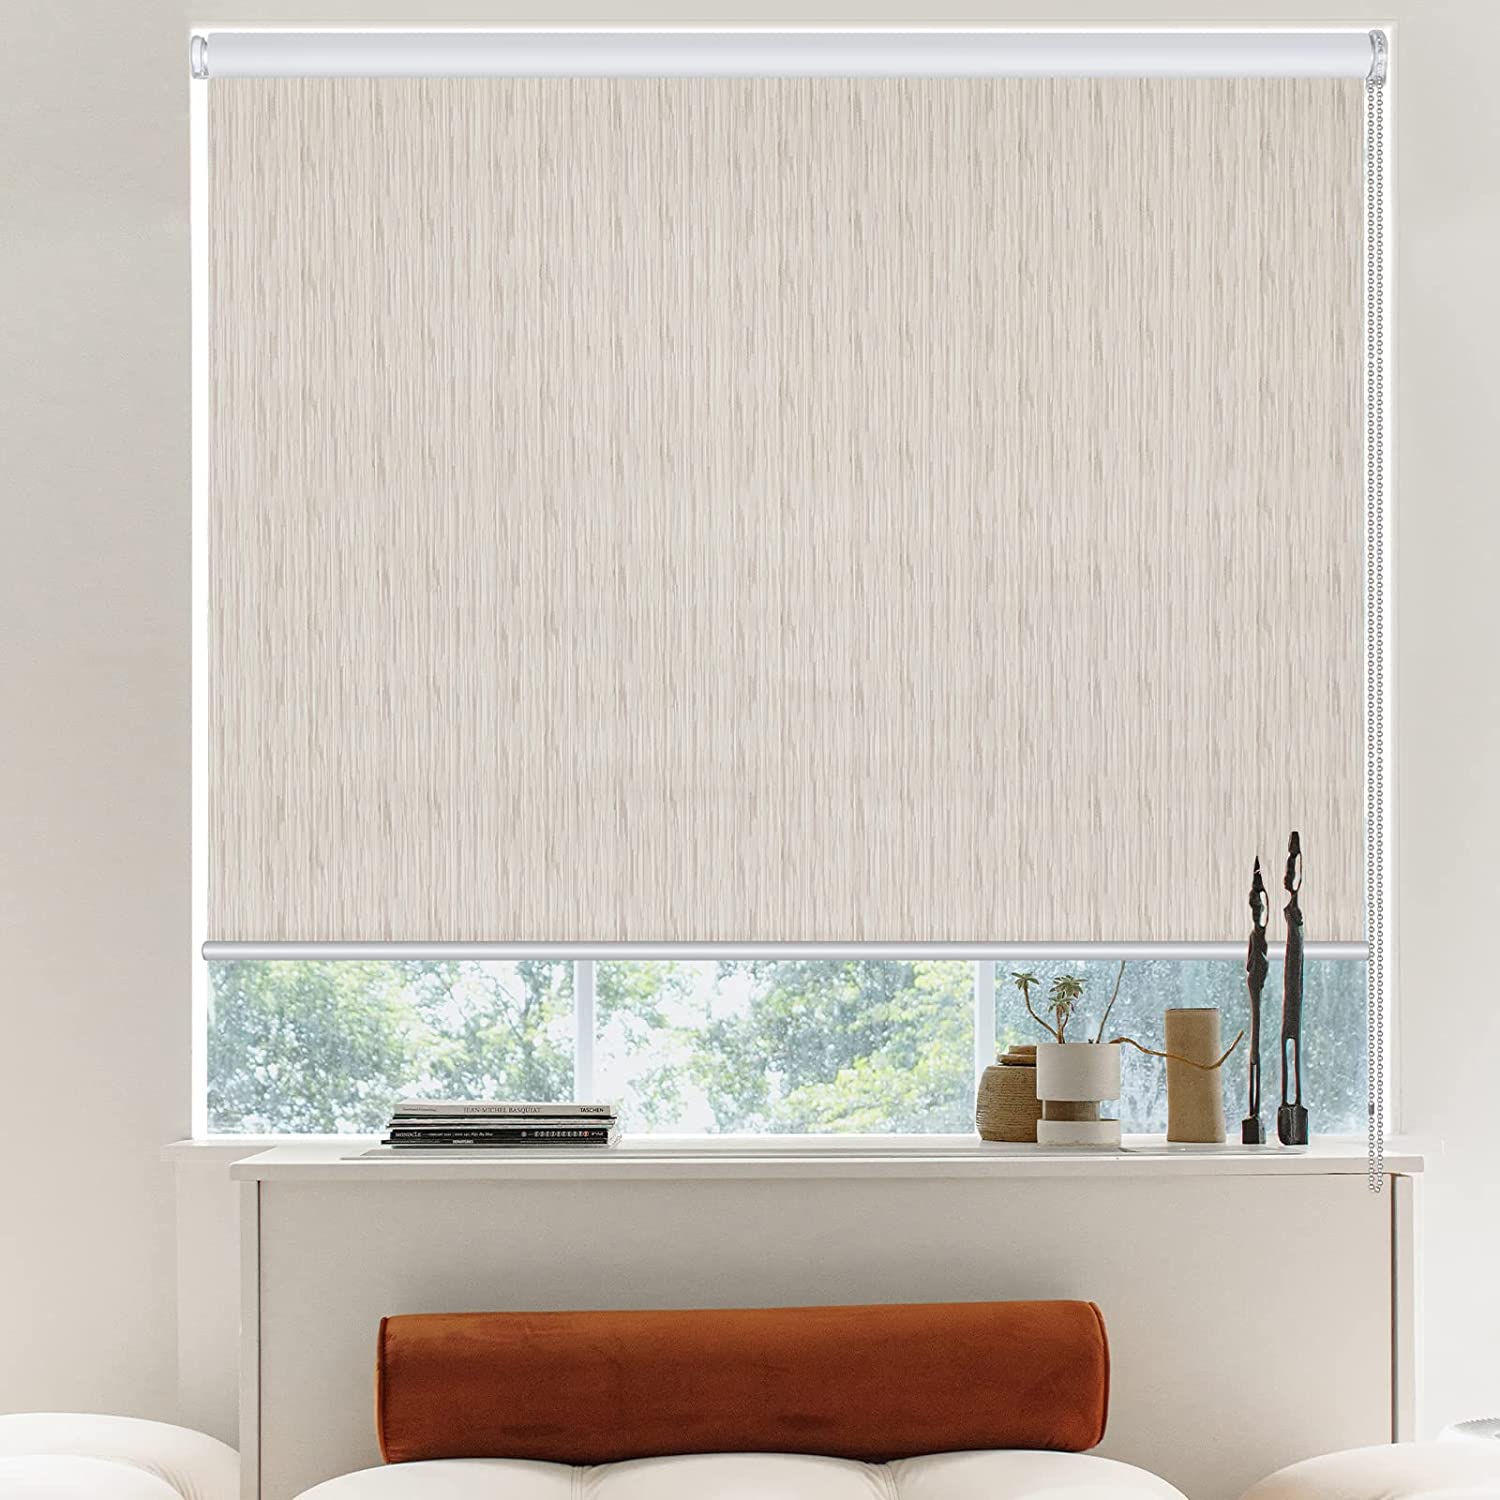 Window Roller Shades, 100% Blackout Roller Blinds UV Protection Thermal Insulated Fabric, Blackout Roller Shades for Windows, Office, Bedroom, Doors, 29" W x 72 "L, Beige